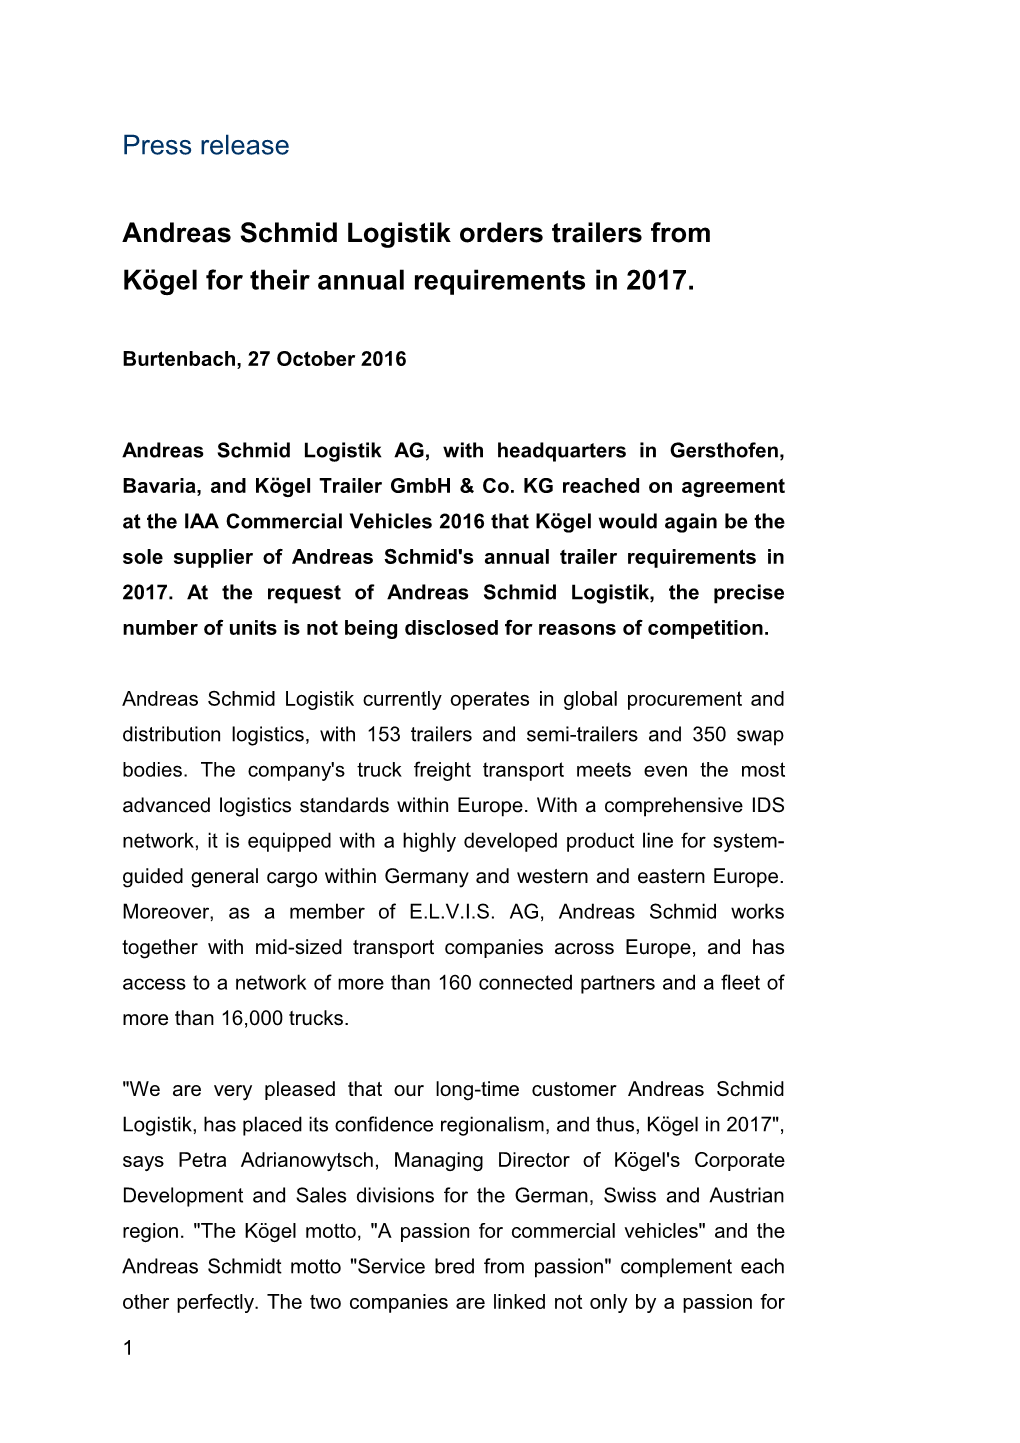 Andreas Schmid Logistik Orders Trailers from Kögel for Their Annual Requirements in 2017